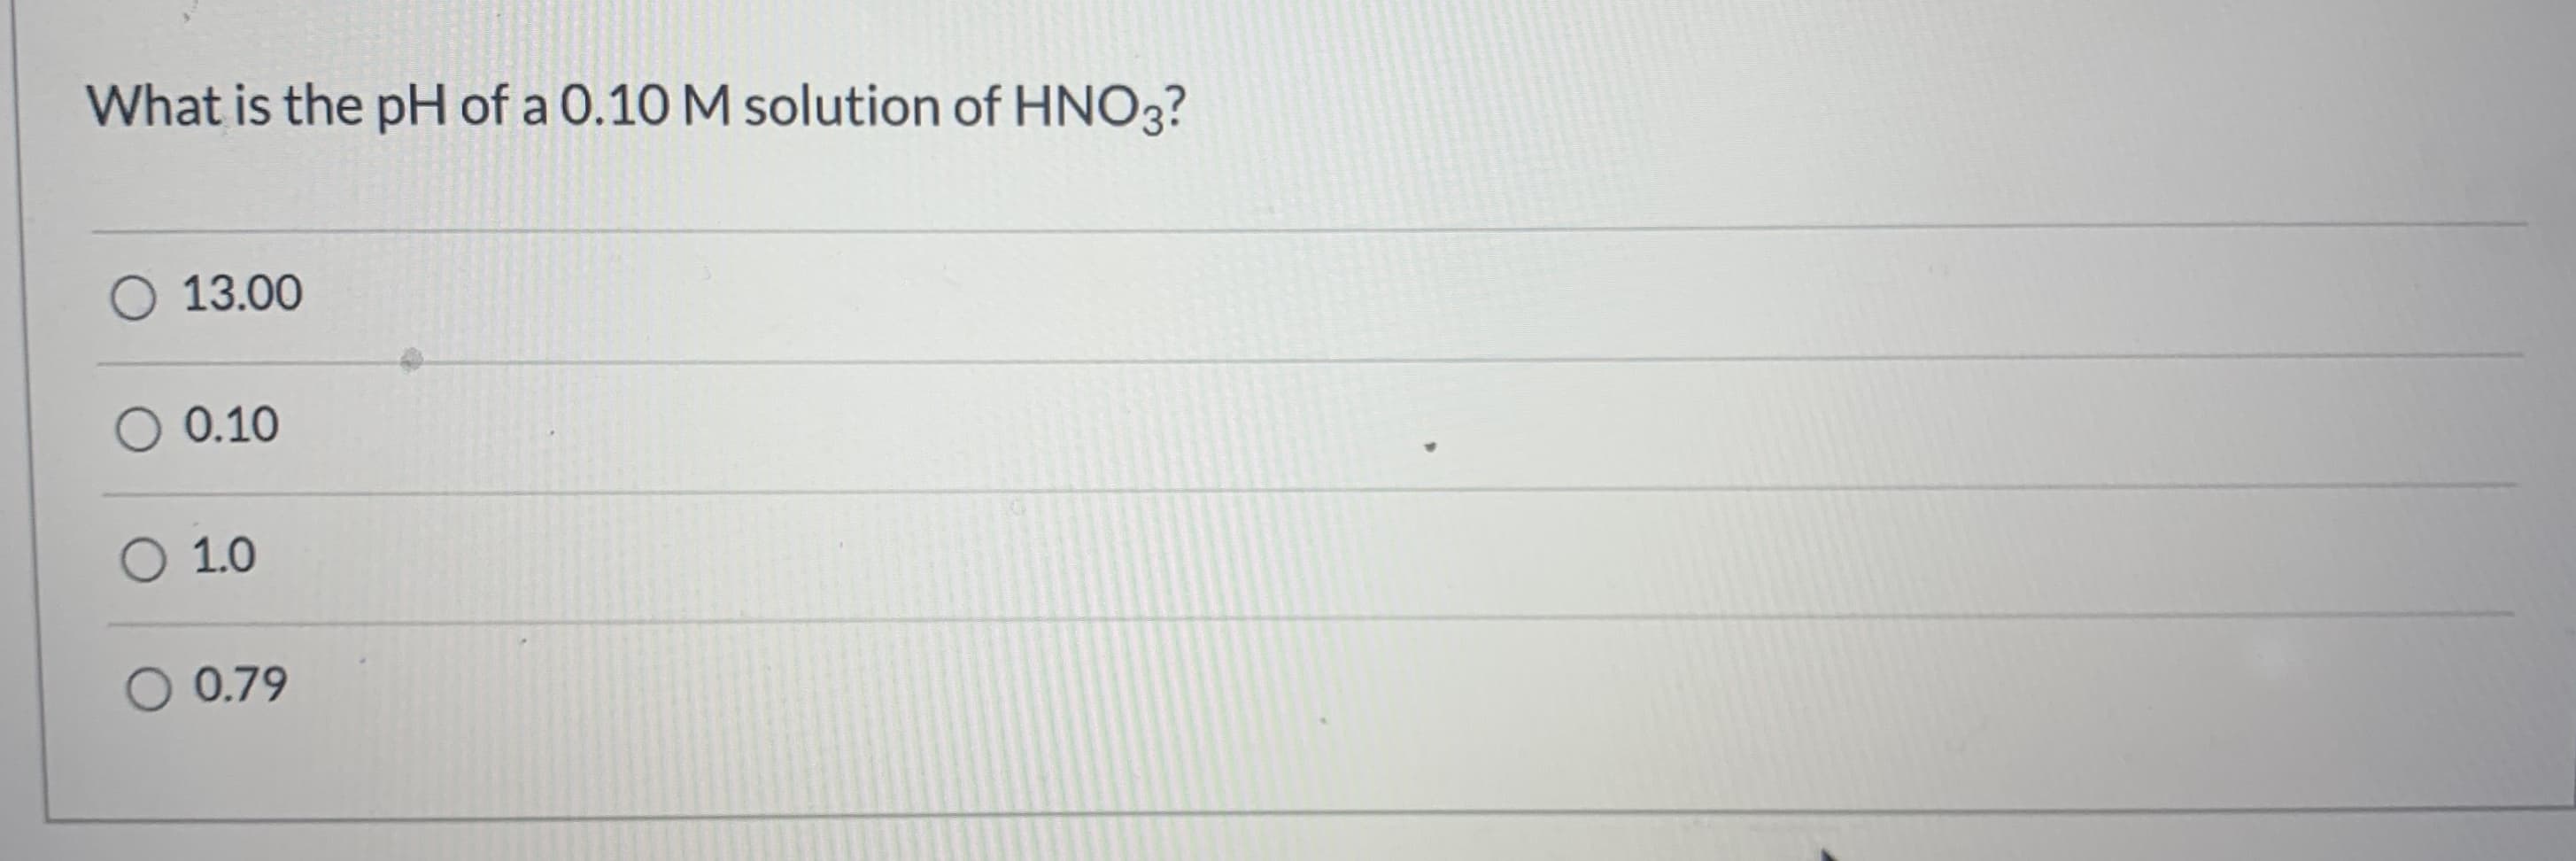 What is the pH of a 0.10 M solution of HNO3?
